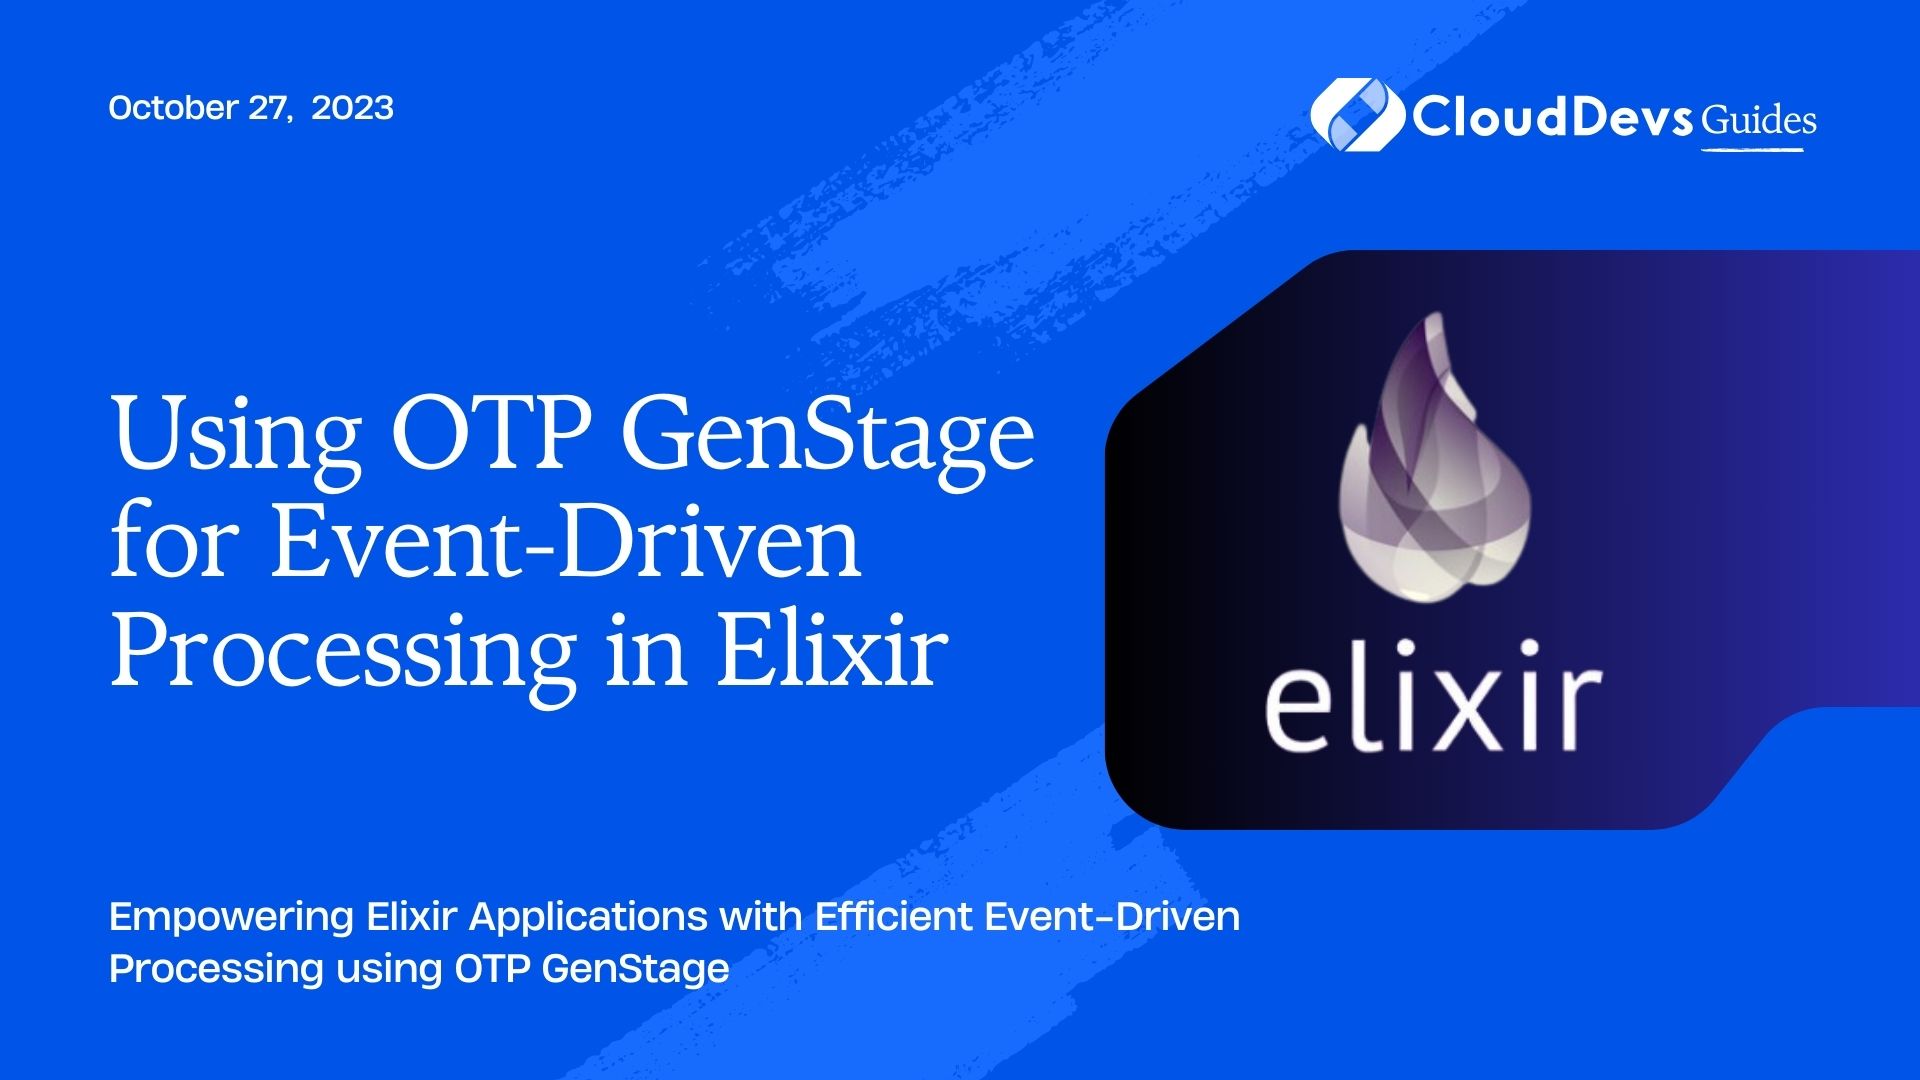 Using OTP GenStage for Event-Driven Processing in Elixir